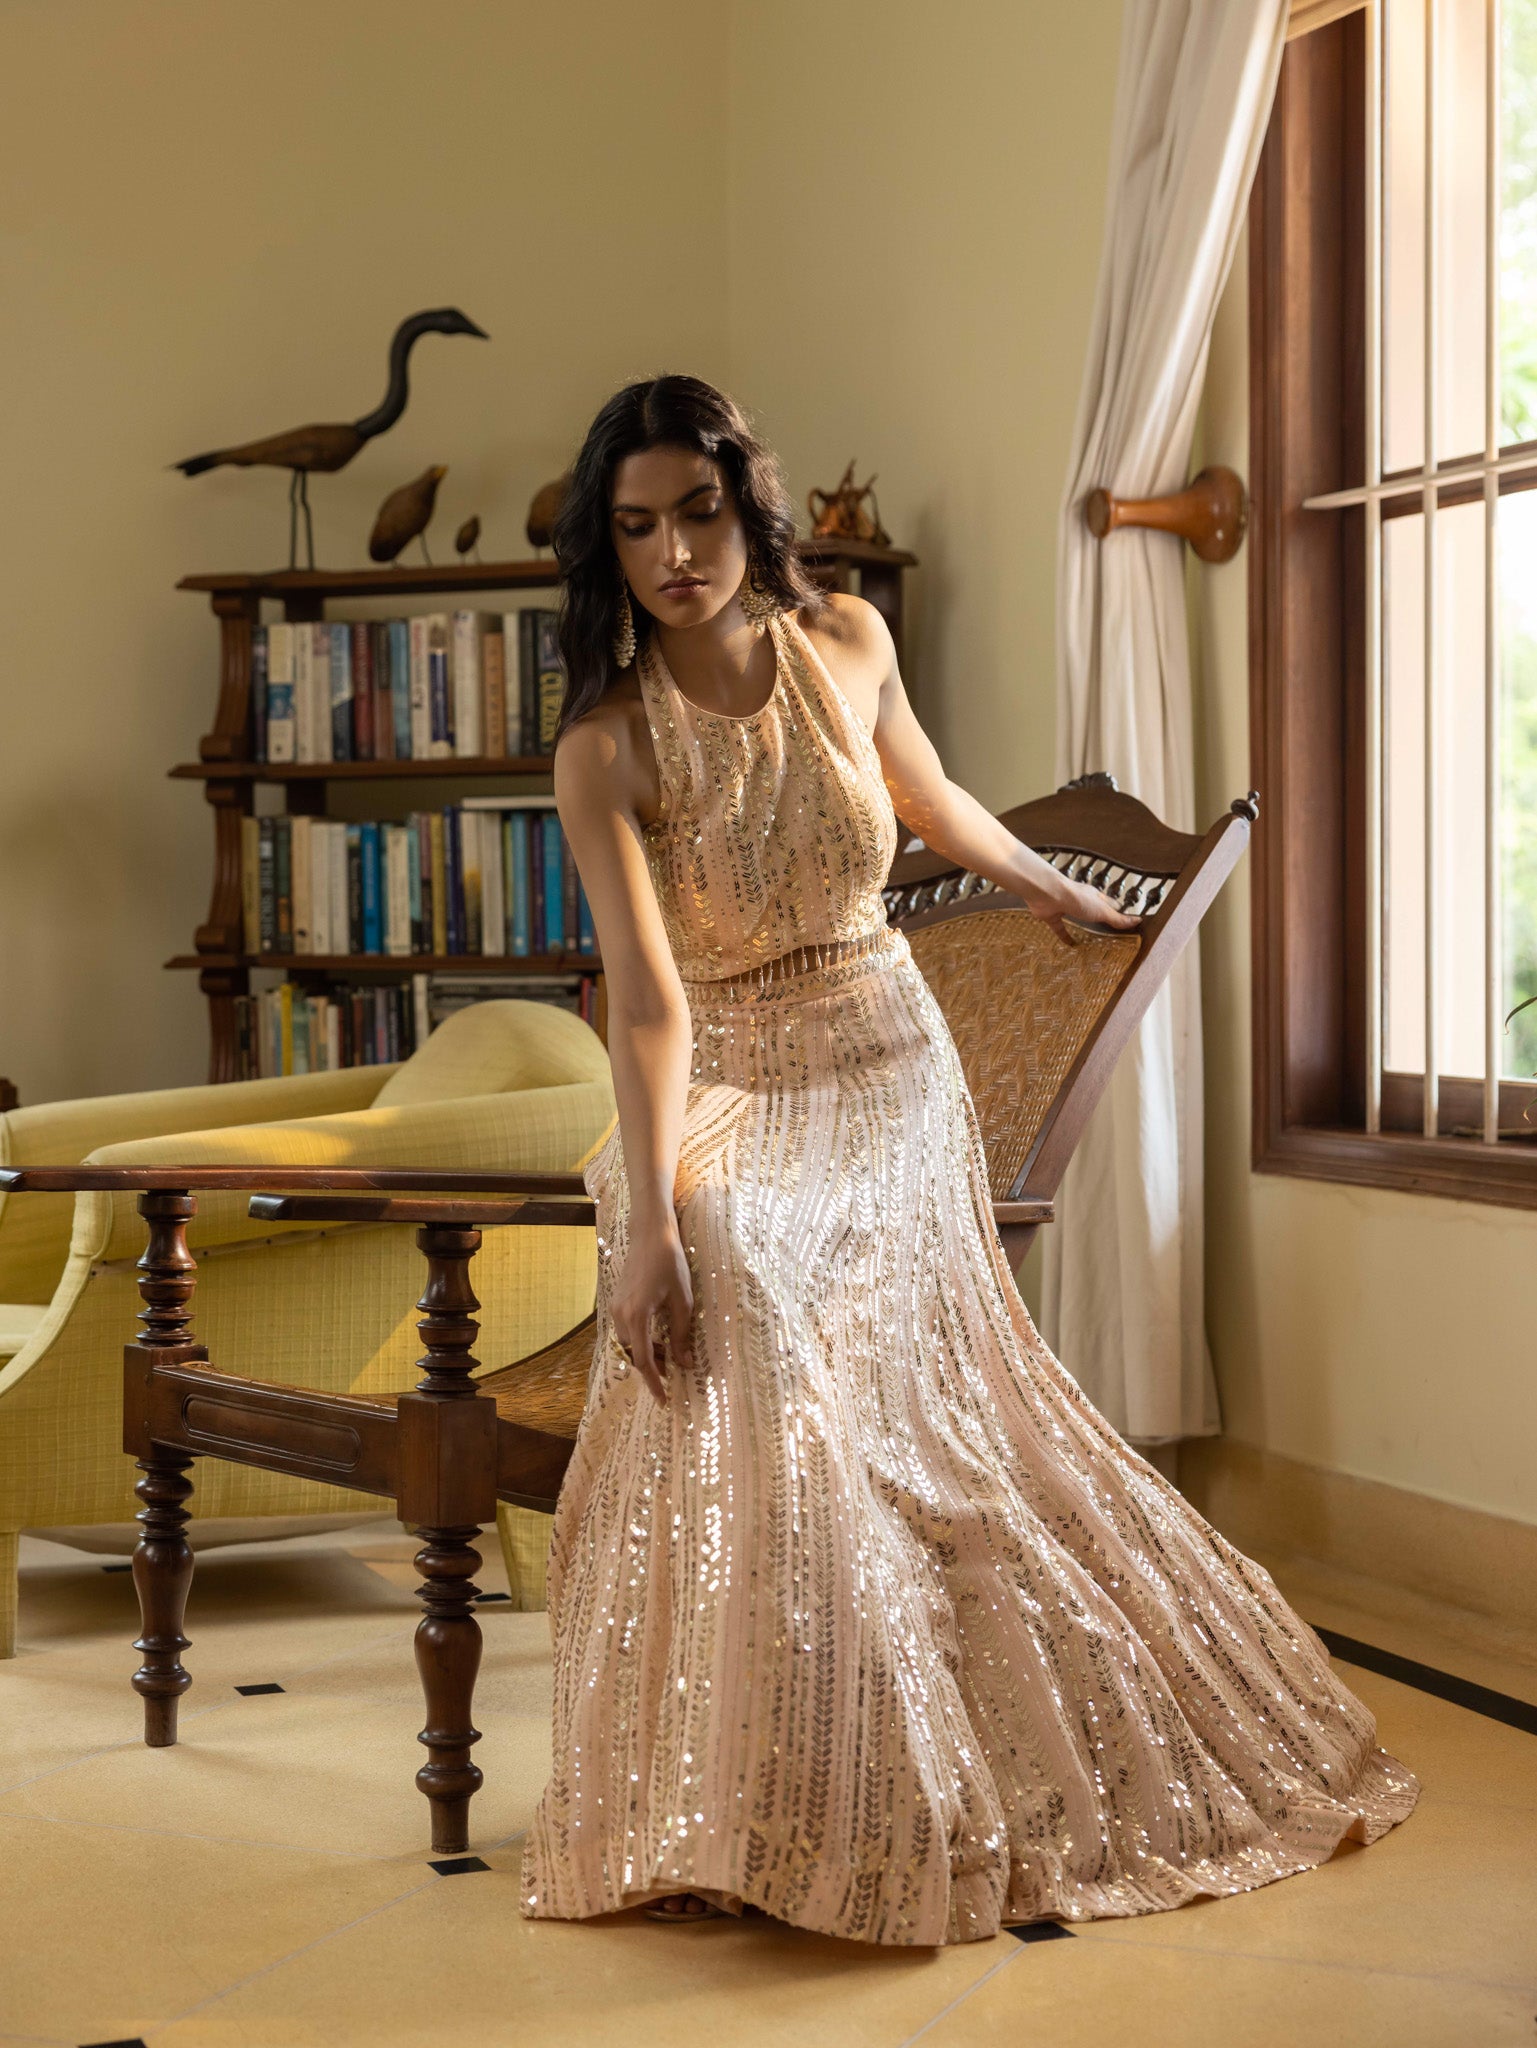 Shop look your best on wedding occasions in this beautiful nude color lehenga with mirror embroidery and a backless blouse. Dazzle on weddings and special occasions with exquisite Indian designer dresses, sharara suits, Anarkali suits, bridal lehengas, sharara suits from Pure Elegance Indian clothing store in the USA. Shop online from Pure Elegance.